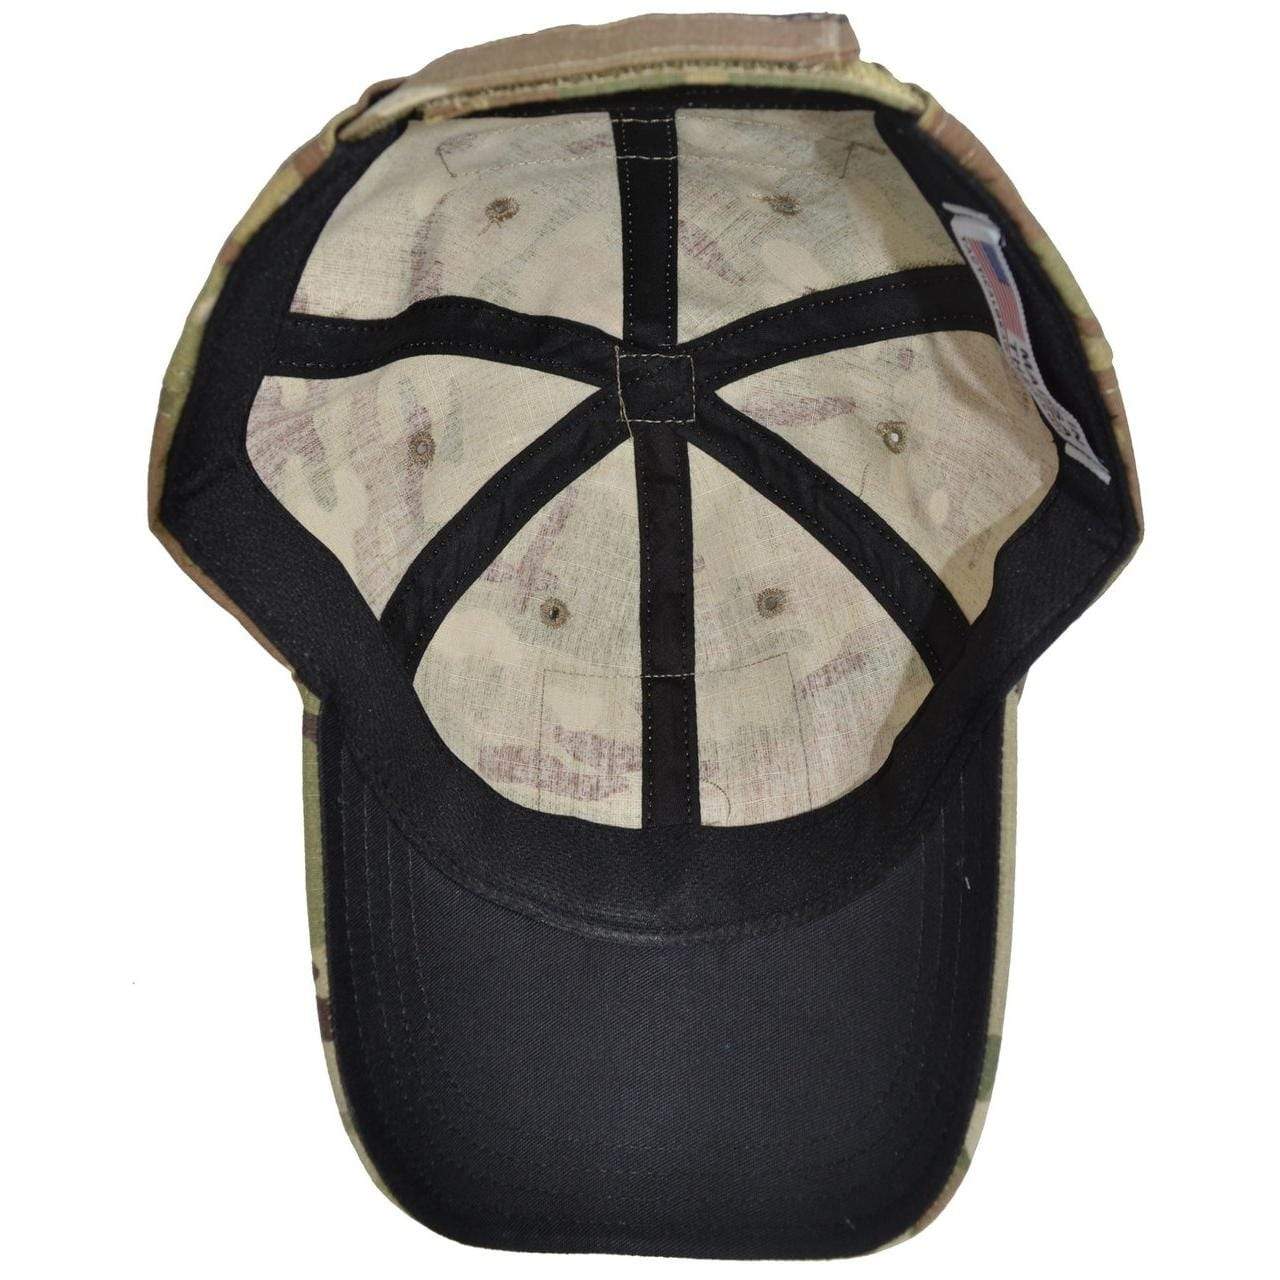 Tactical Gear Junkie Patches Tactical Gear Junkie American Made Tactical Operator Hat - with Custom 1x3.75 Patch